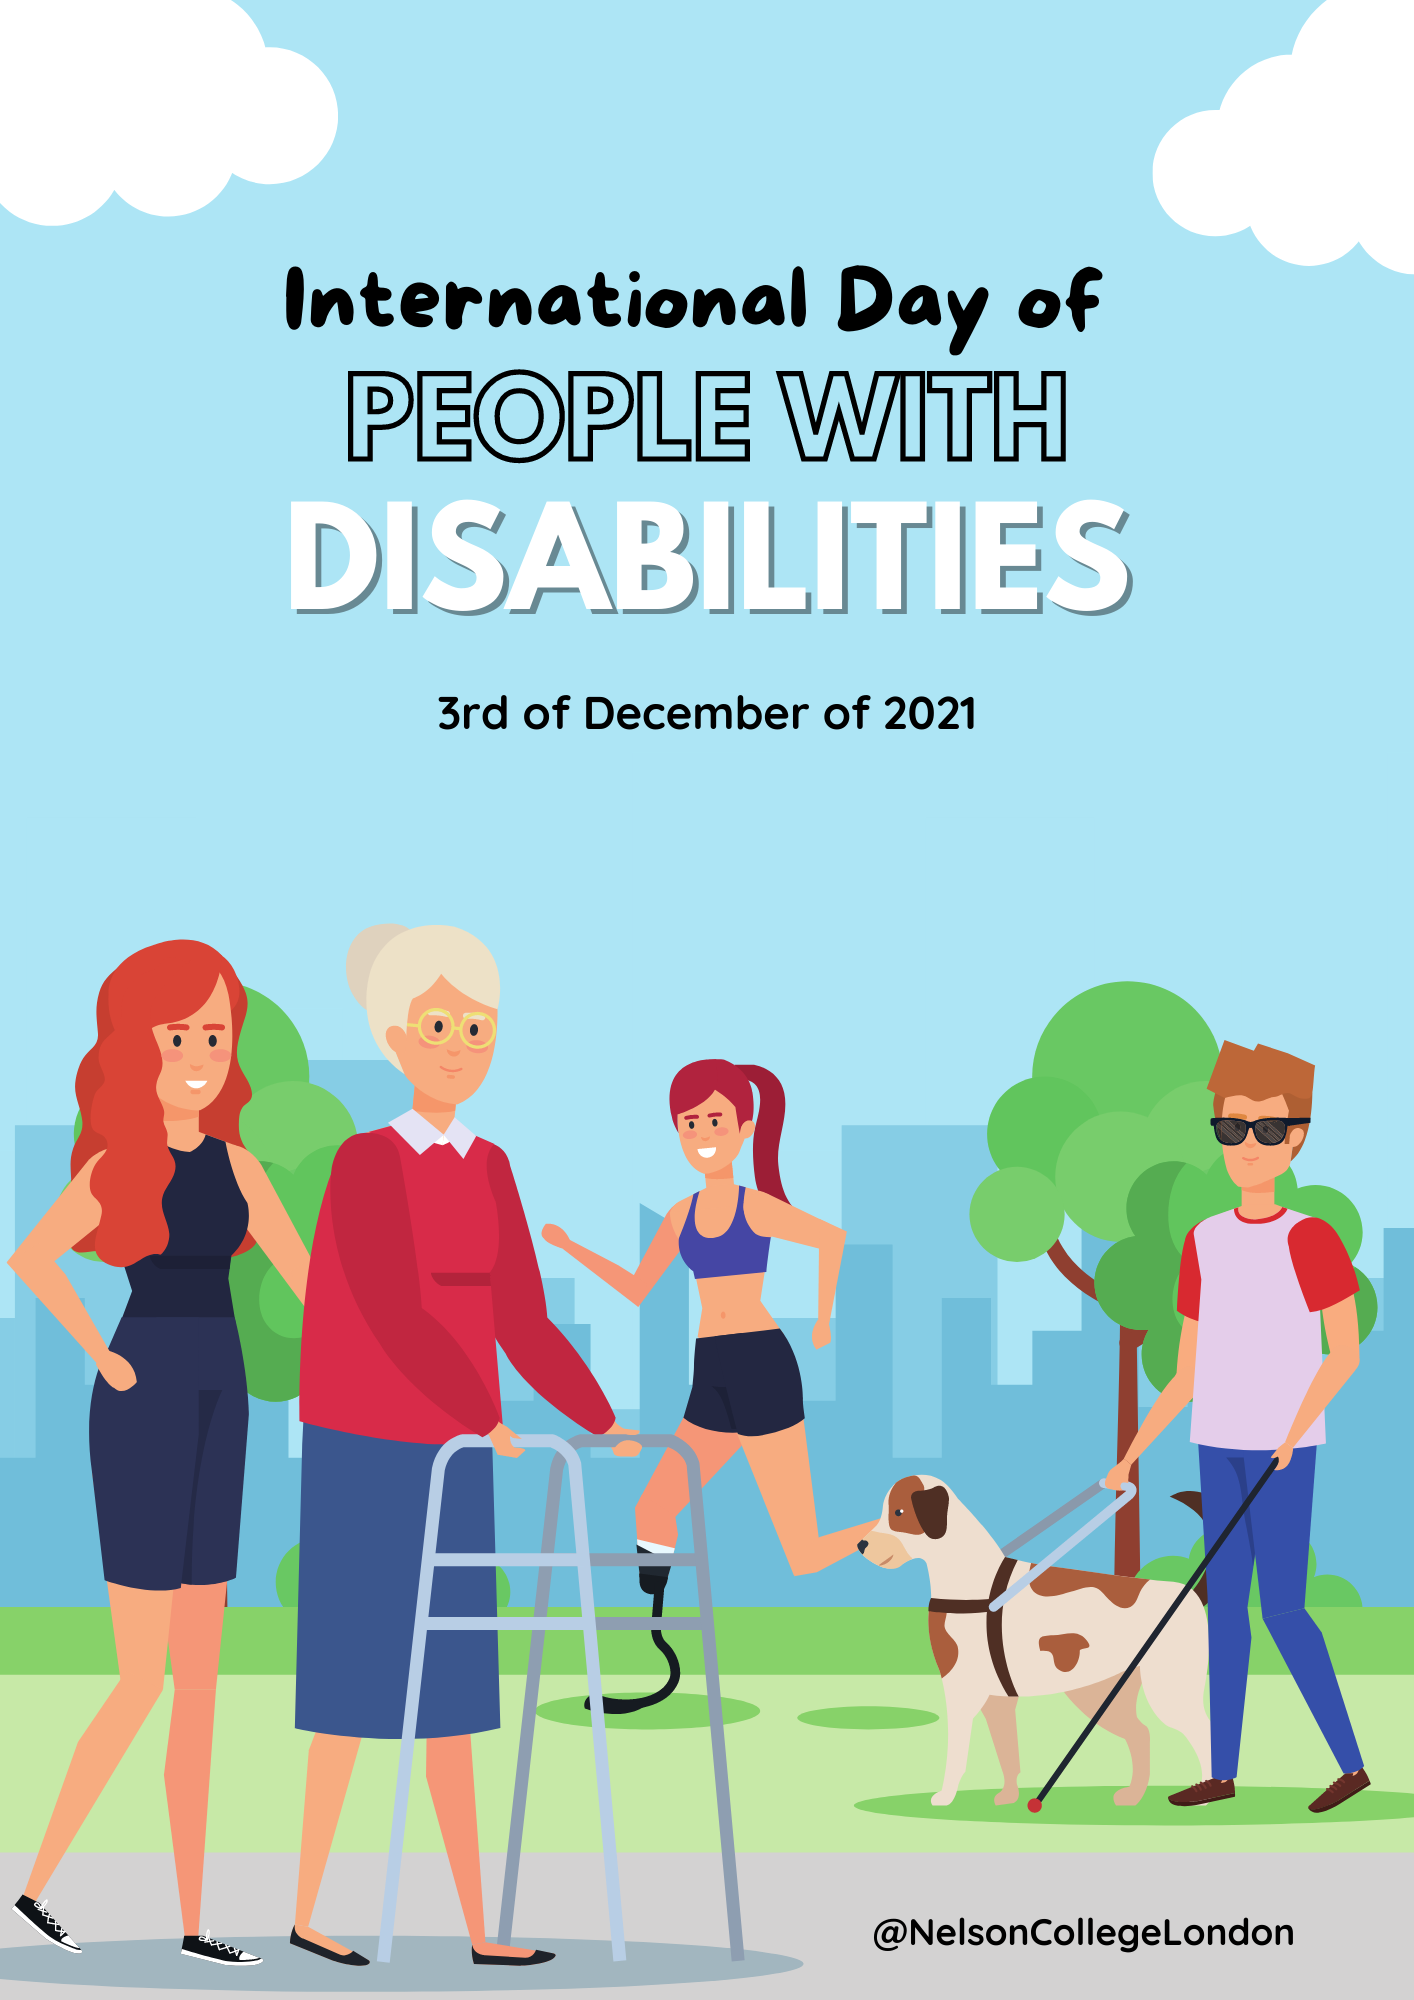 International Day of People with Disabilities - Friday 3rd December 2021